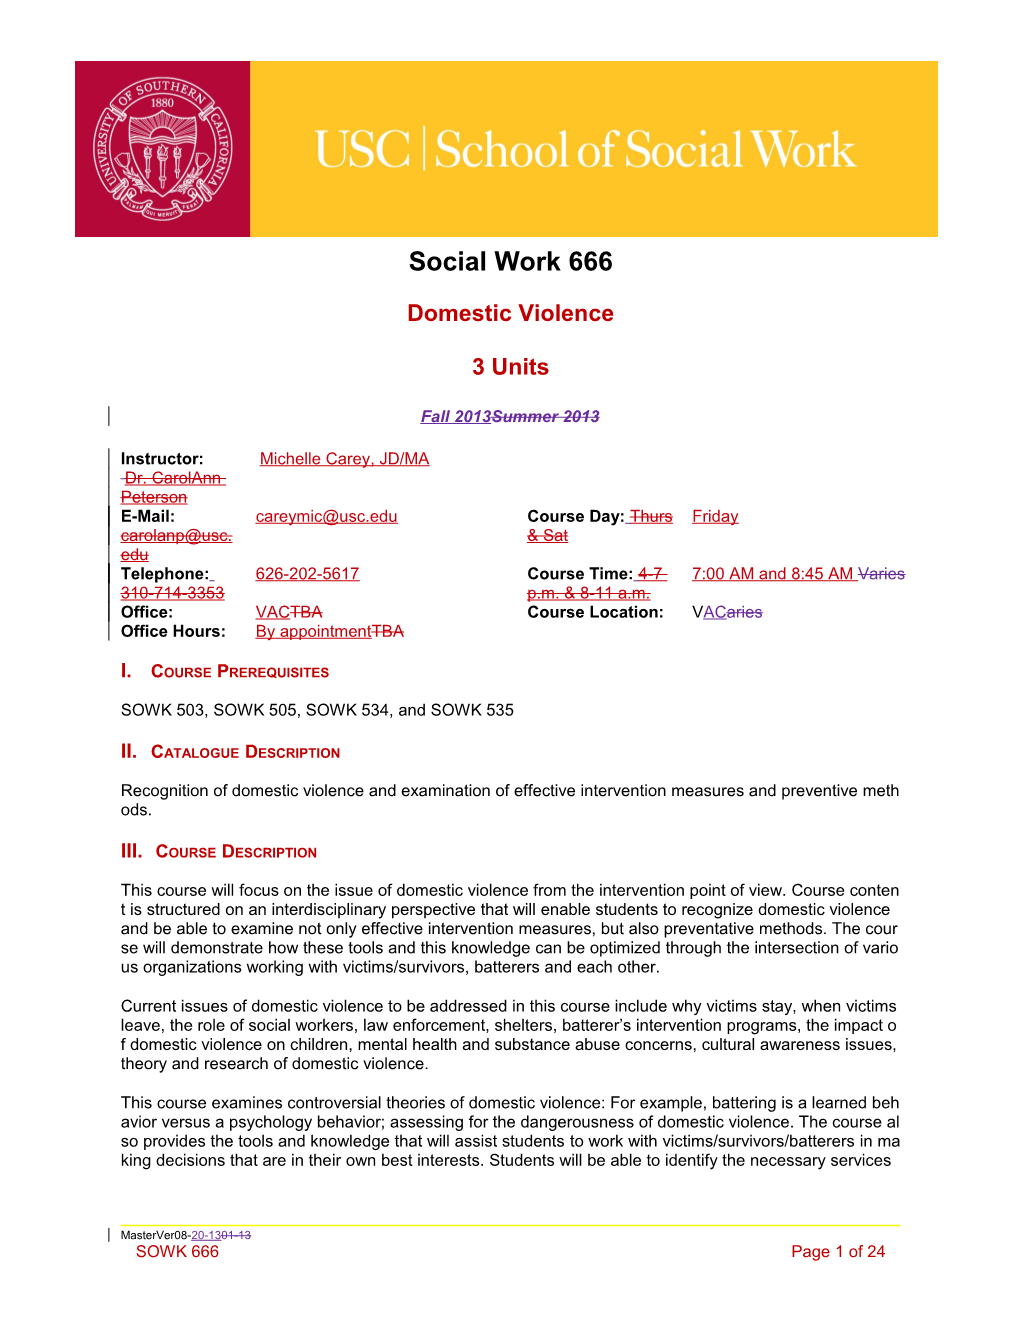 School of Social Work Syllabus Template Guide s19